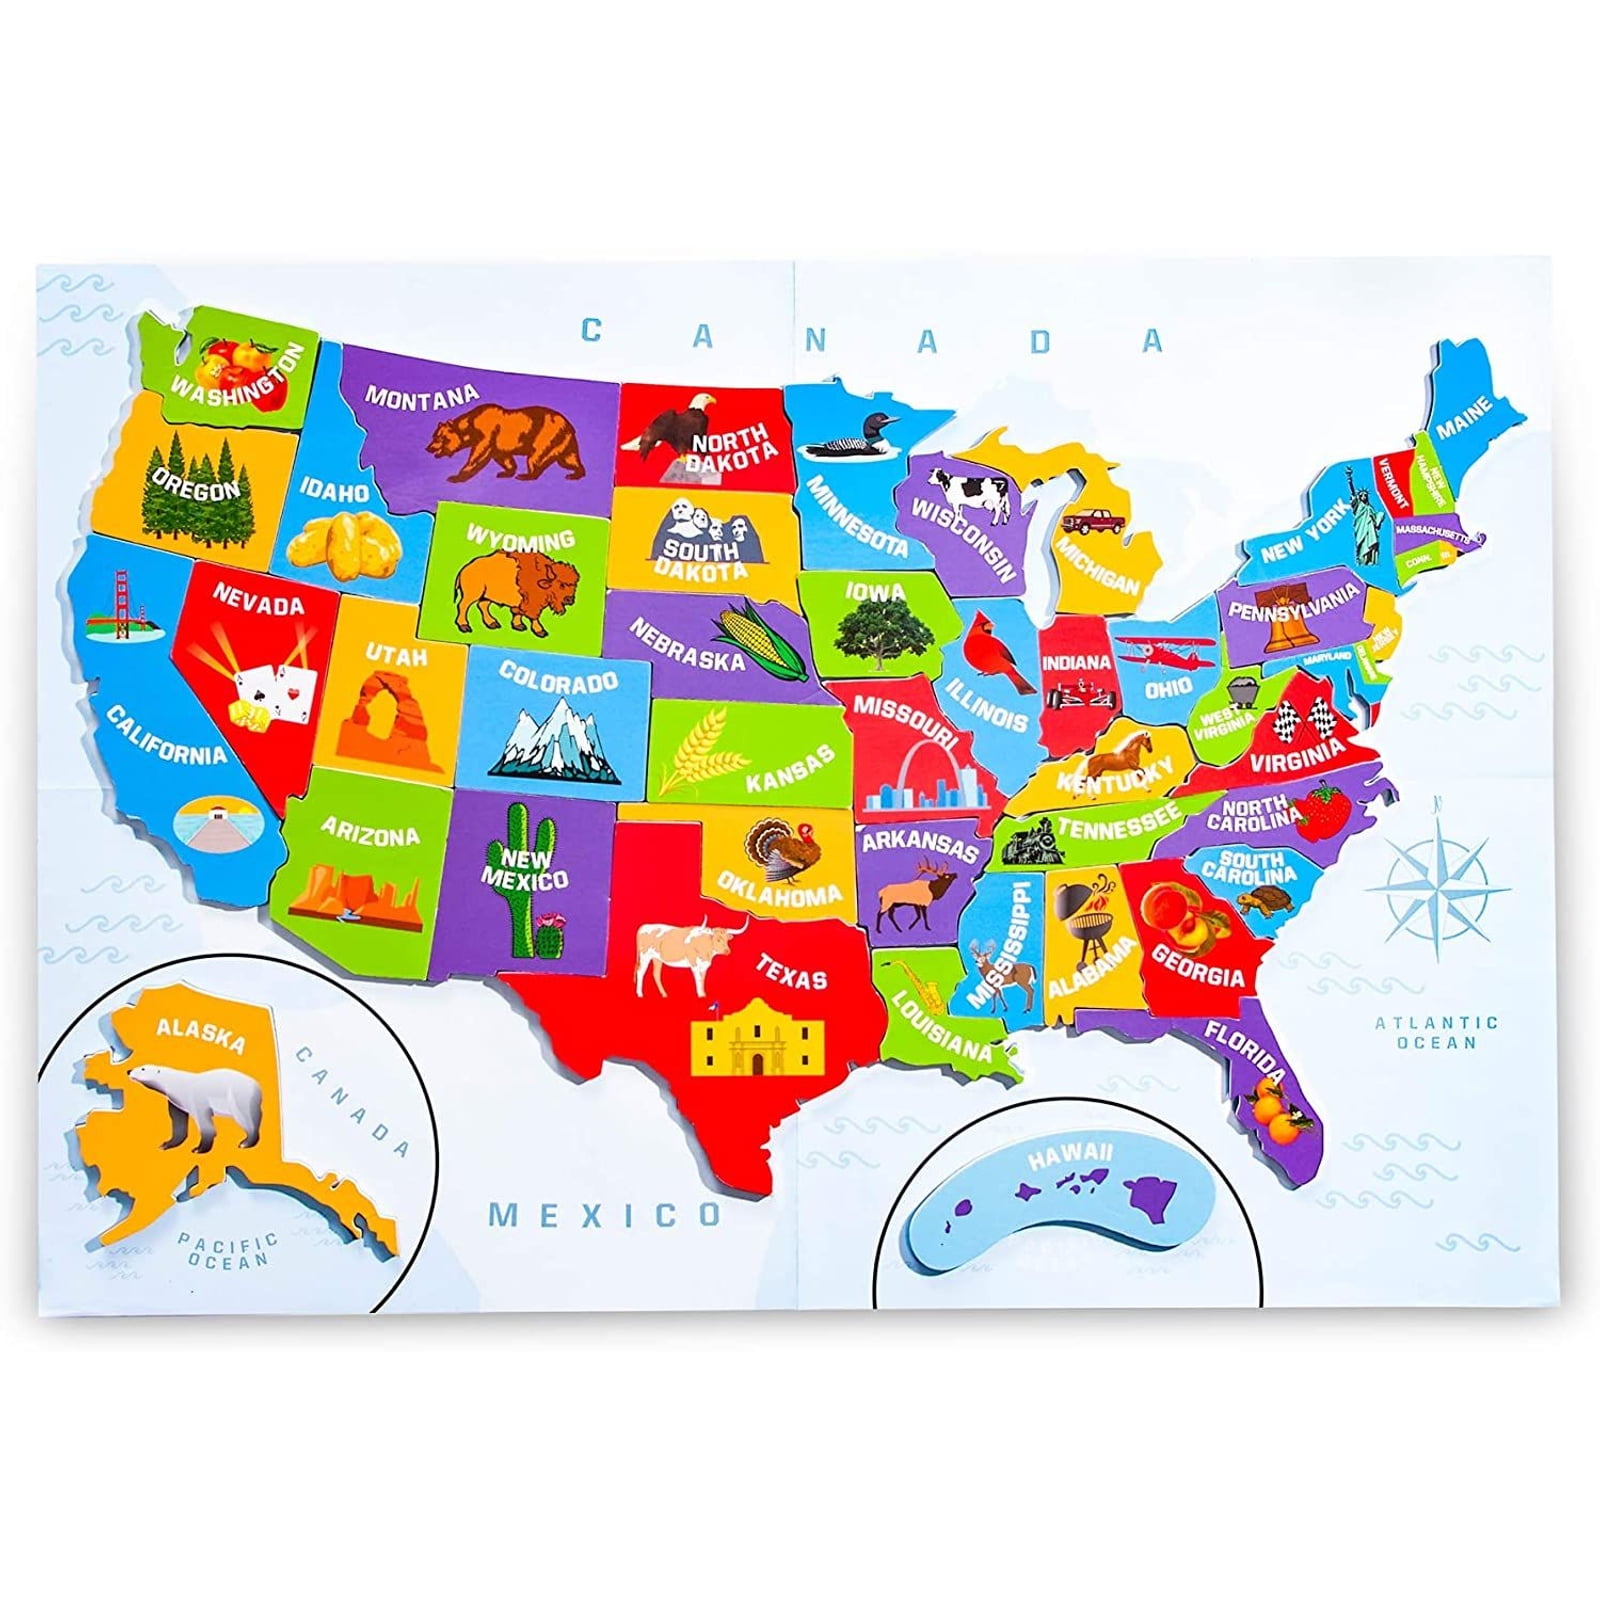 VATOS Wooden Kids Puzzles,44 Pieces Jigsaw Puzzle World Map Puzzles for Kids Ages 2-4 Toddler Puzzles Preschool Educational Learning Toys Set Montessori Toys for Boys and Girls 3 4 5 6 7 8